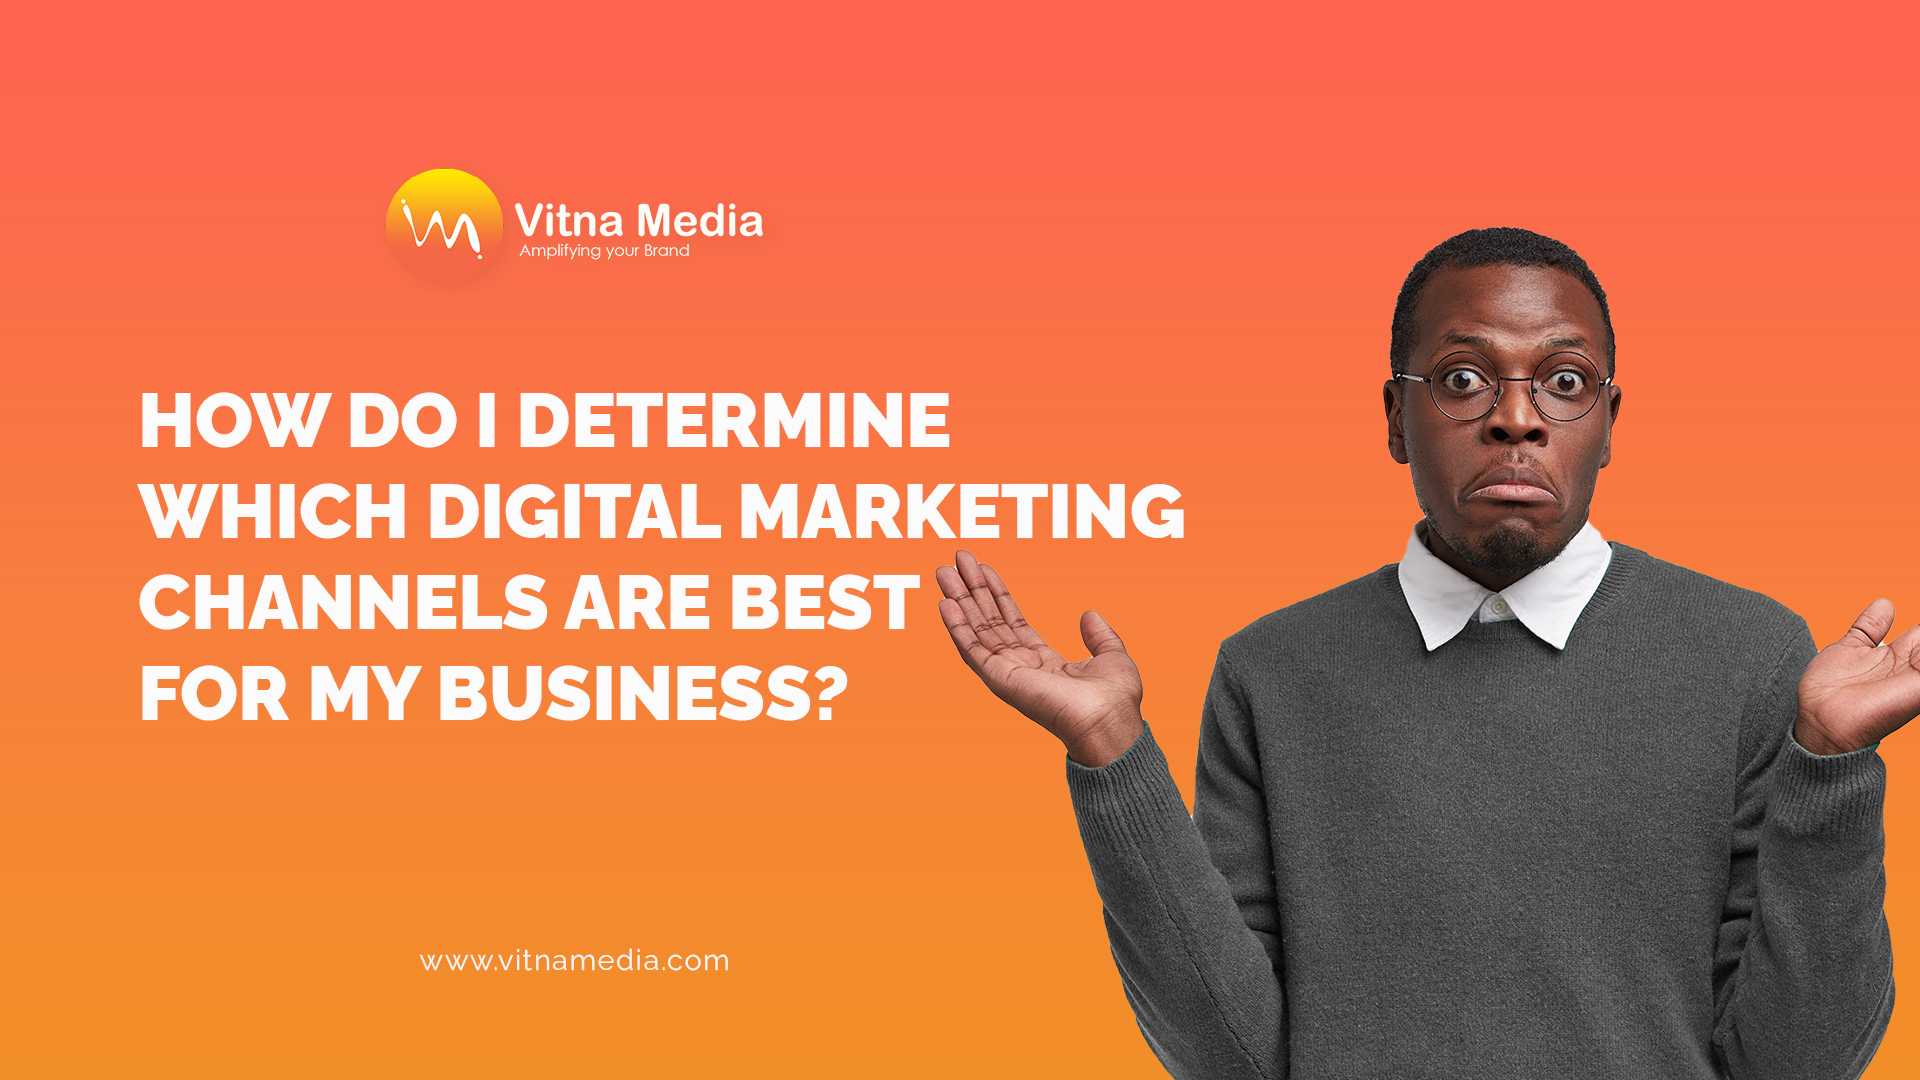 How Do I Determine Which Digital Marketing Channels Are Best for My Business?